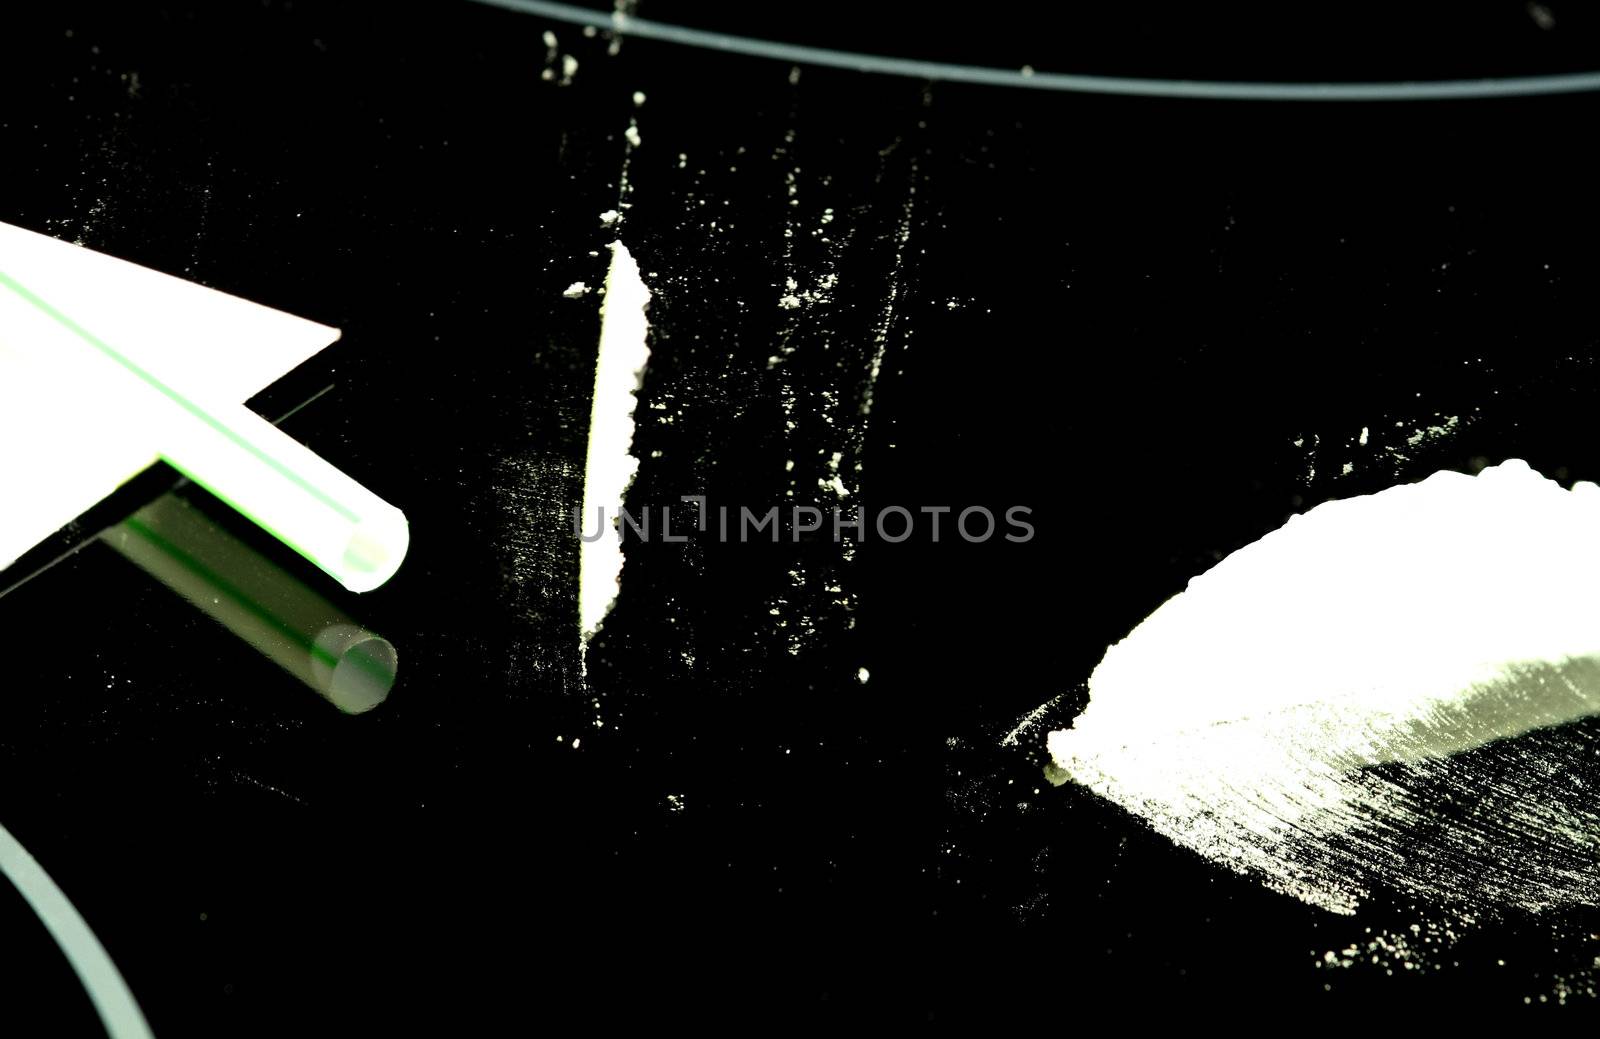 Cocaine and lines (flour) on a black reflective surface